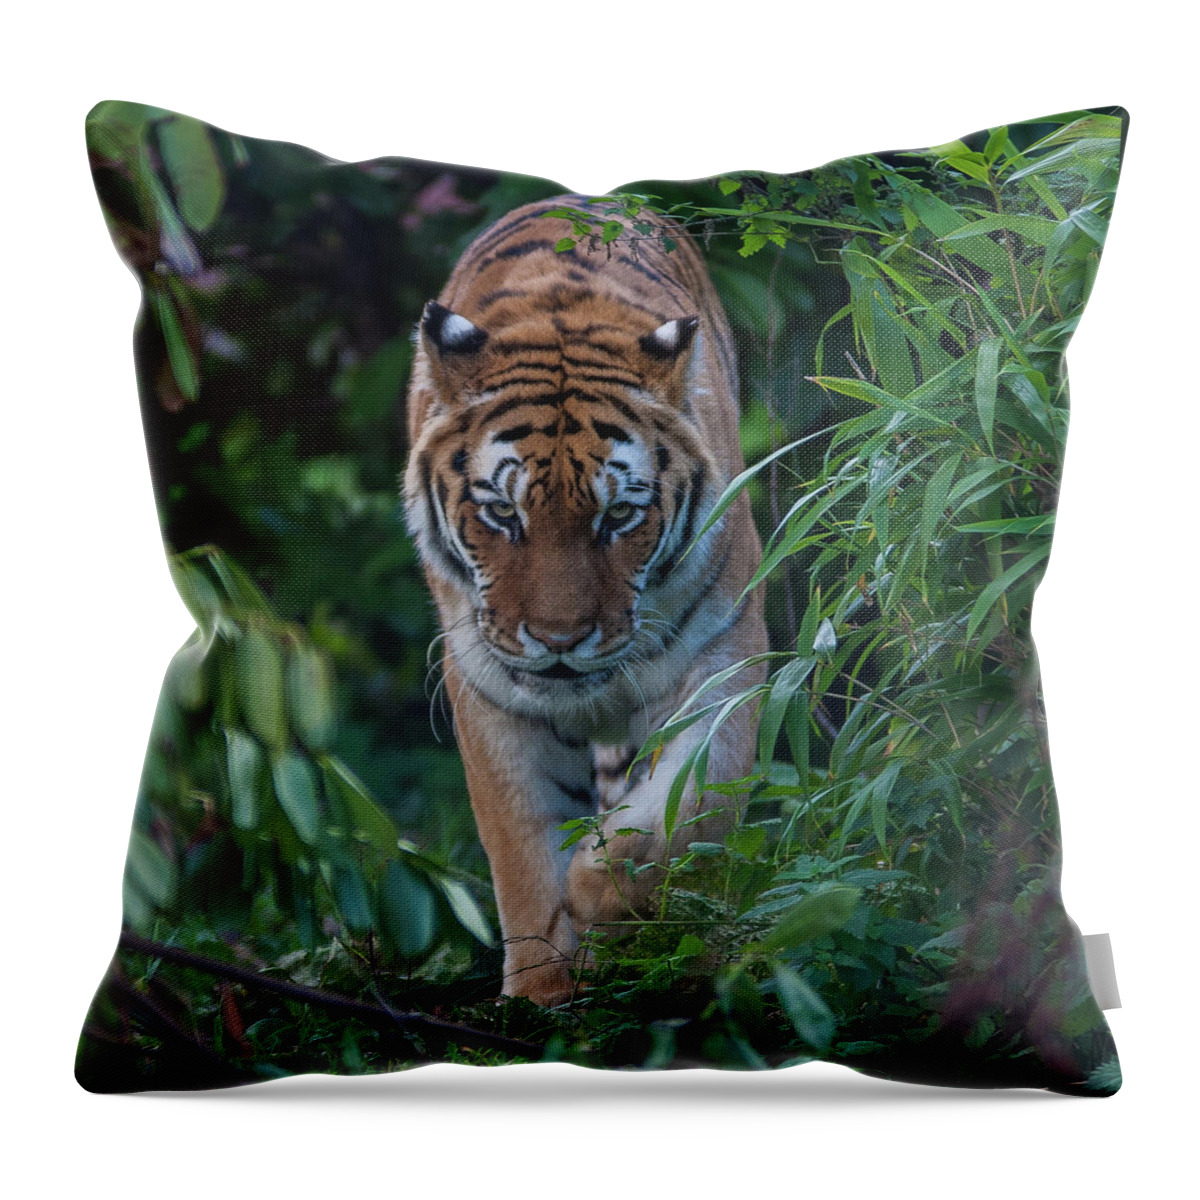 Animal Themes Throw Pillow featuring the photograph Looking For Dinner by M Bilton